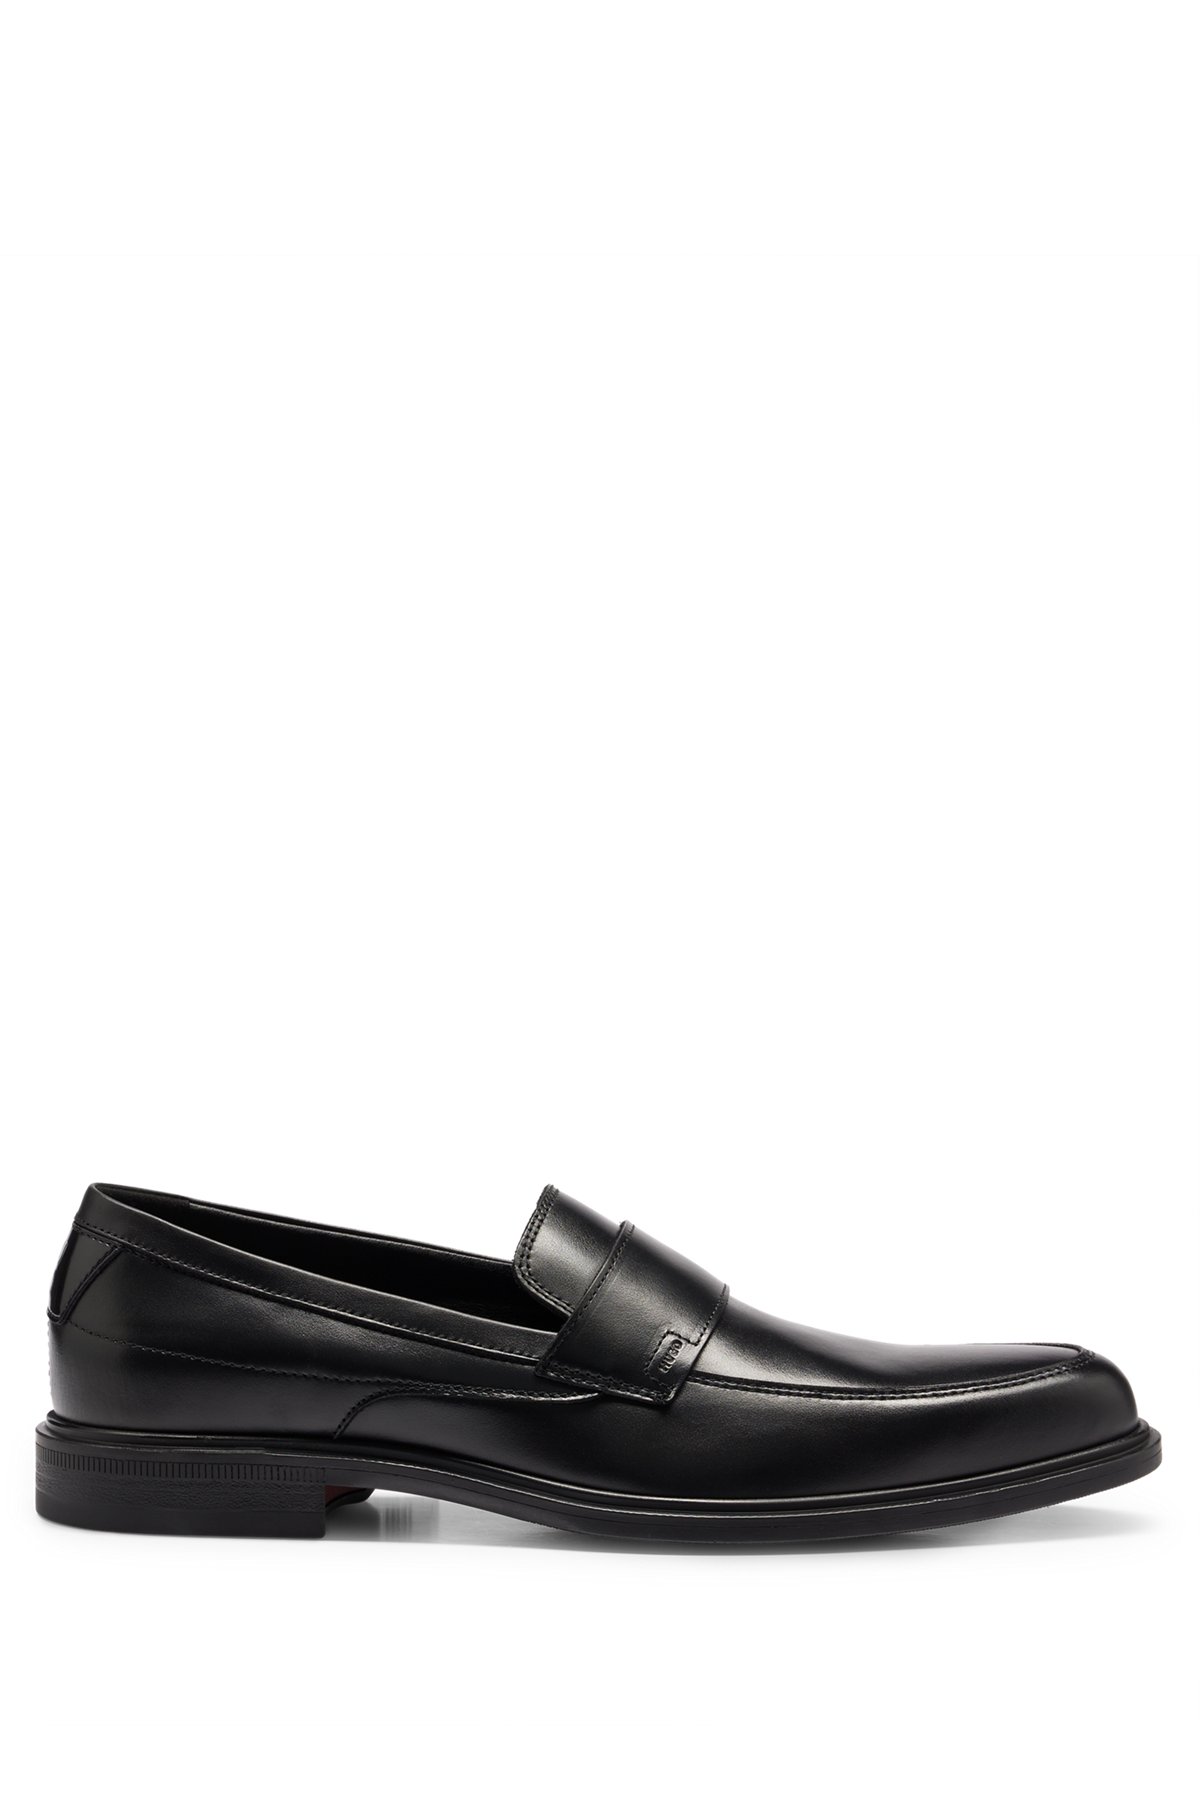 Nappa-leather loafers with stacked logo trim, Black